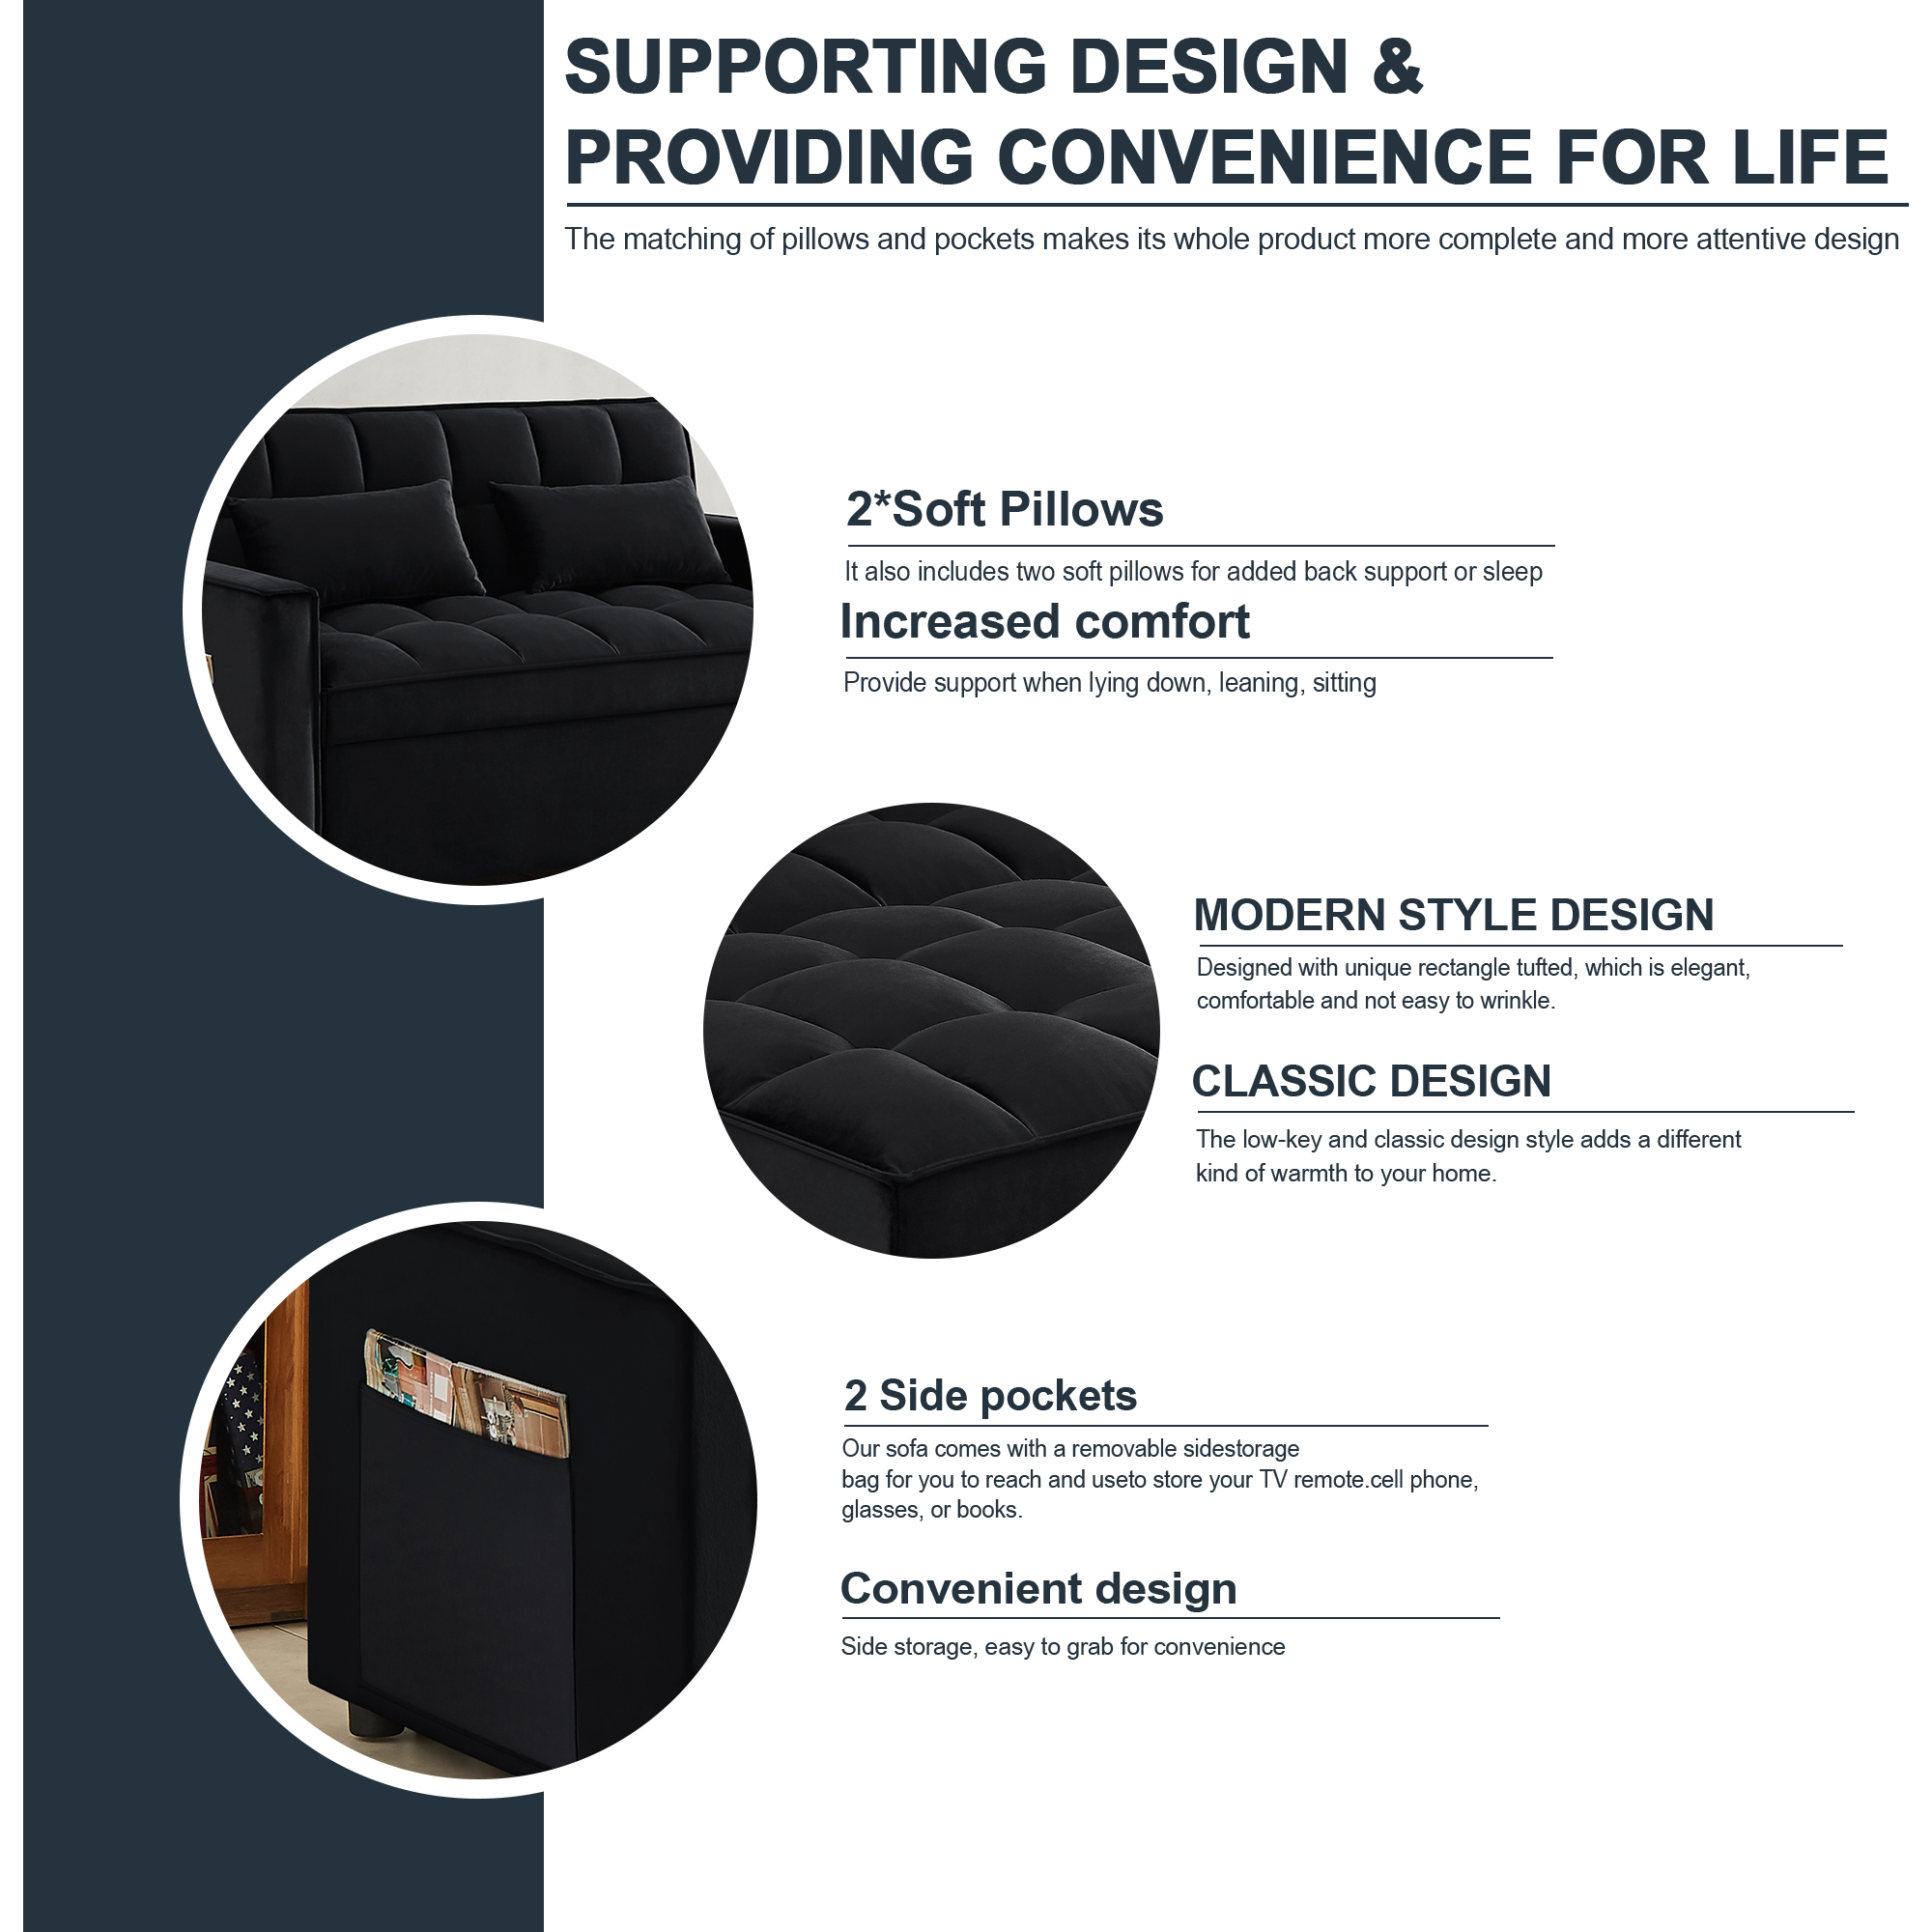 Muumblus 55" Pull Out Sofa Bed, Convertible Sleeper Loveseat with Pull Out Bed, Modern Velvet Sleeper for Living Room, Adjsutable Backrest, Black - image 5 of 8